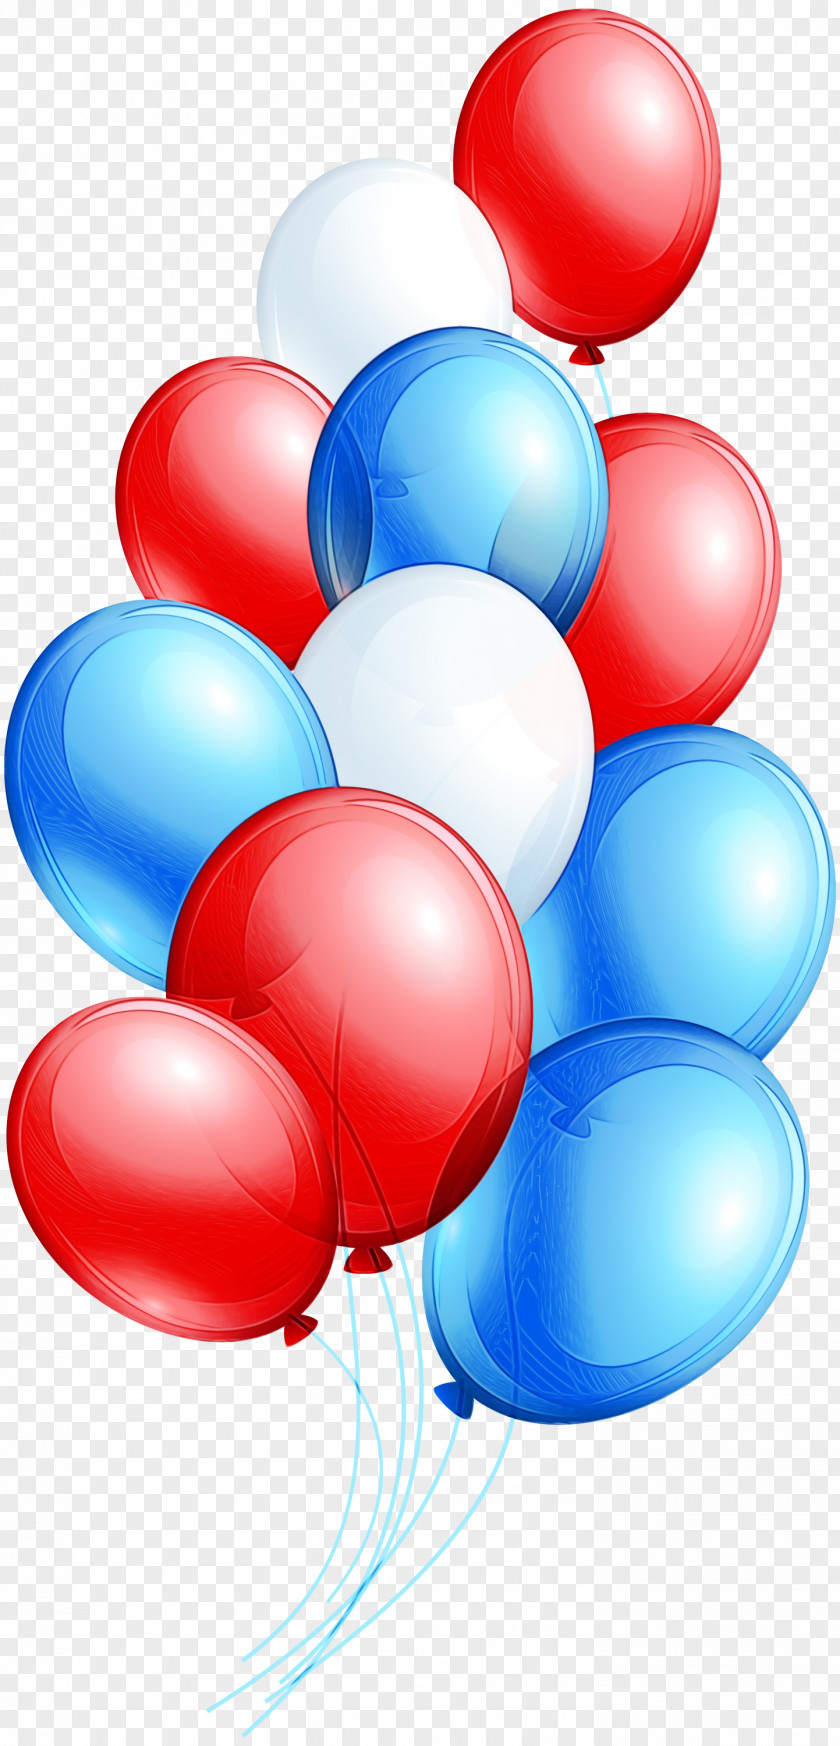 Blue Balloons Clip Art Image PNG